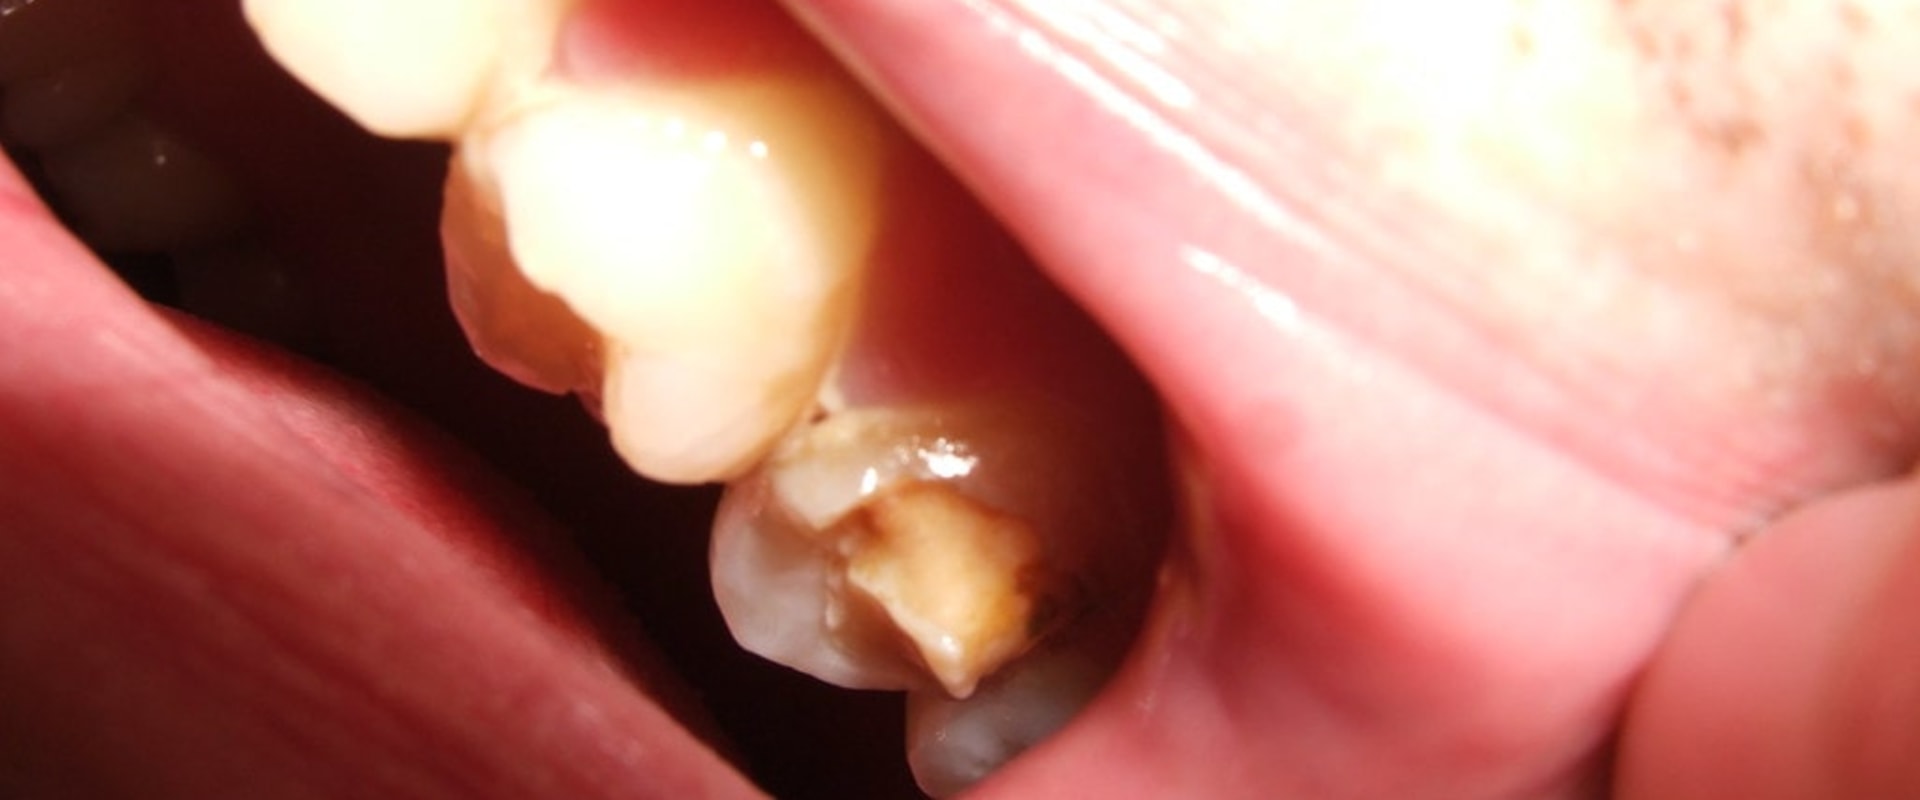 How to Prevent a Chipped Tooth from Getting Worse